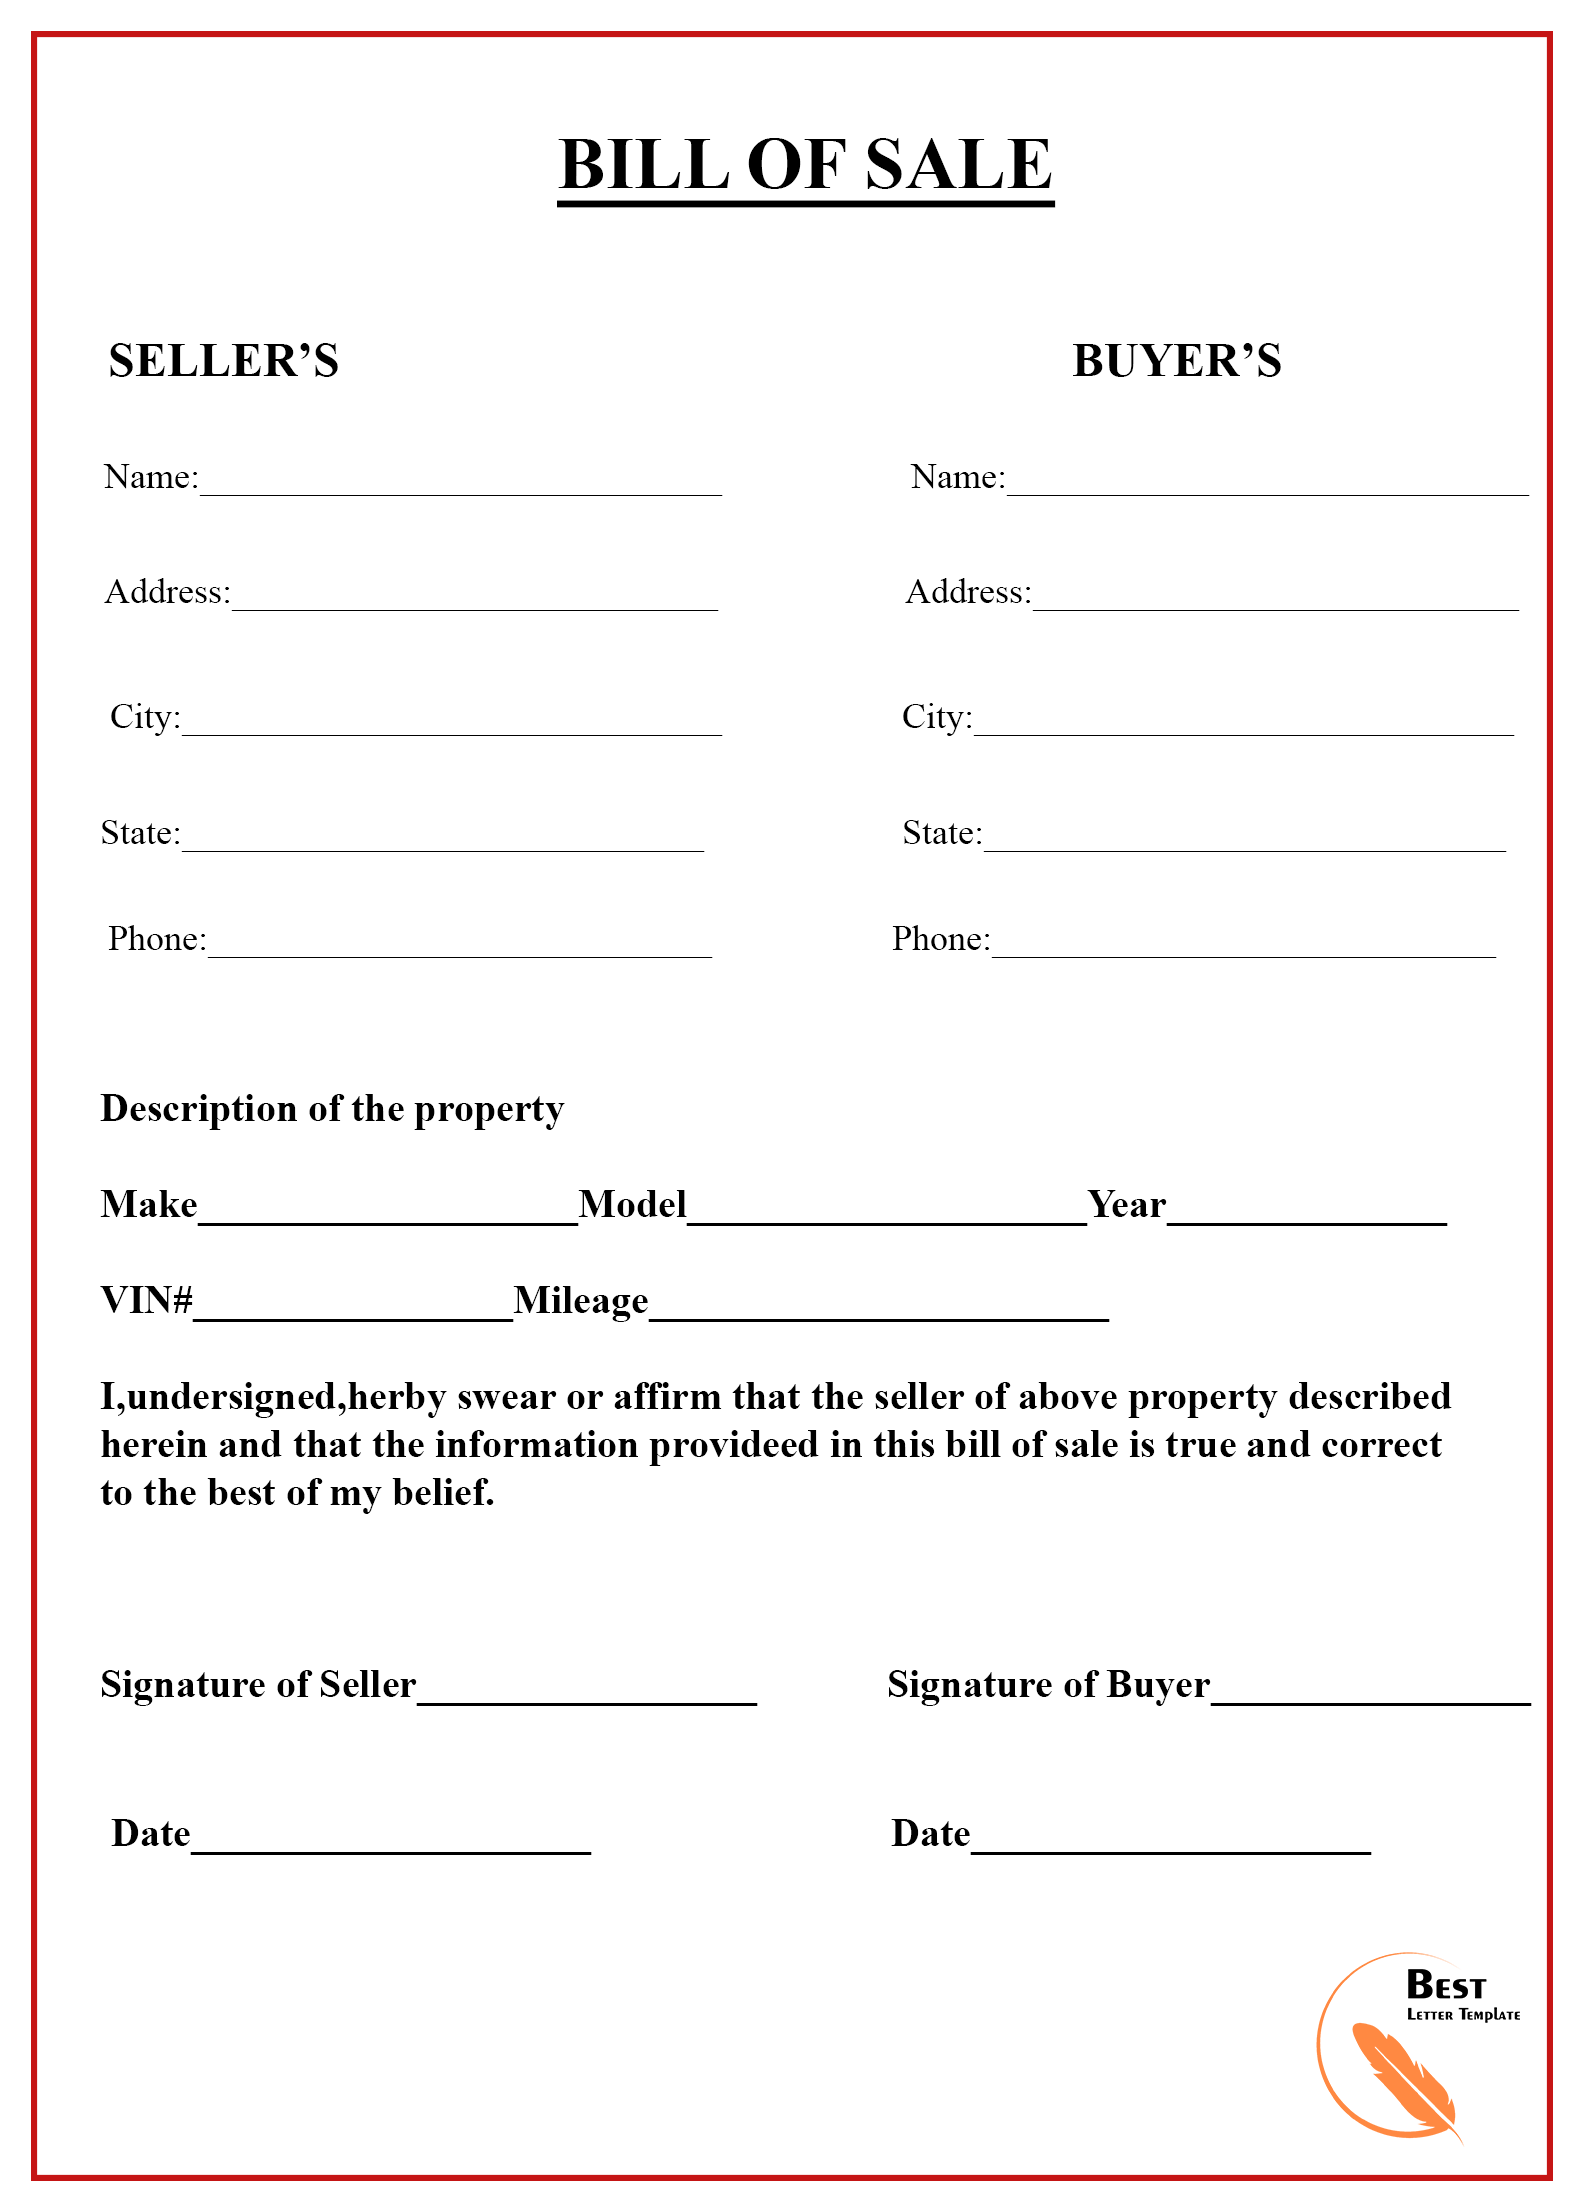 Generic Printable Bill Of Sale The Basic Word Template Includes A Space